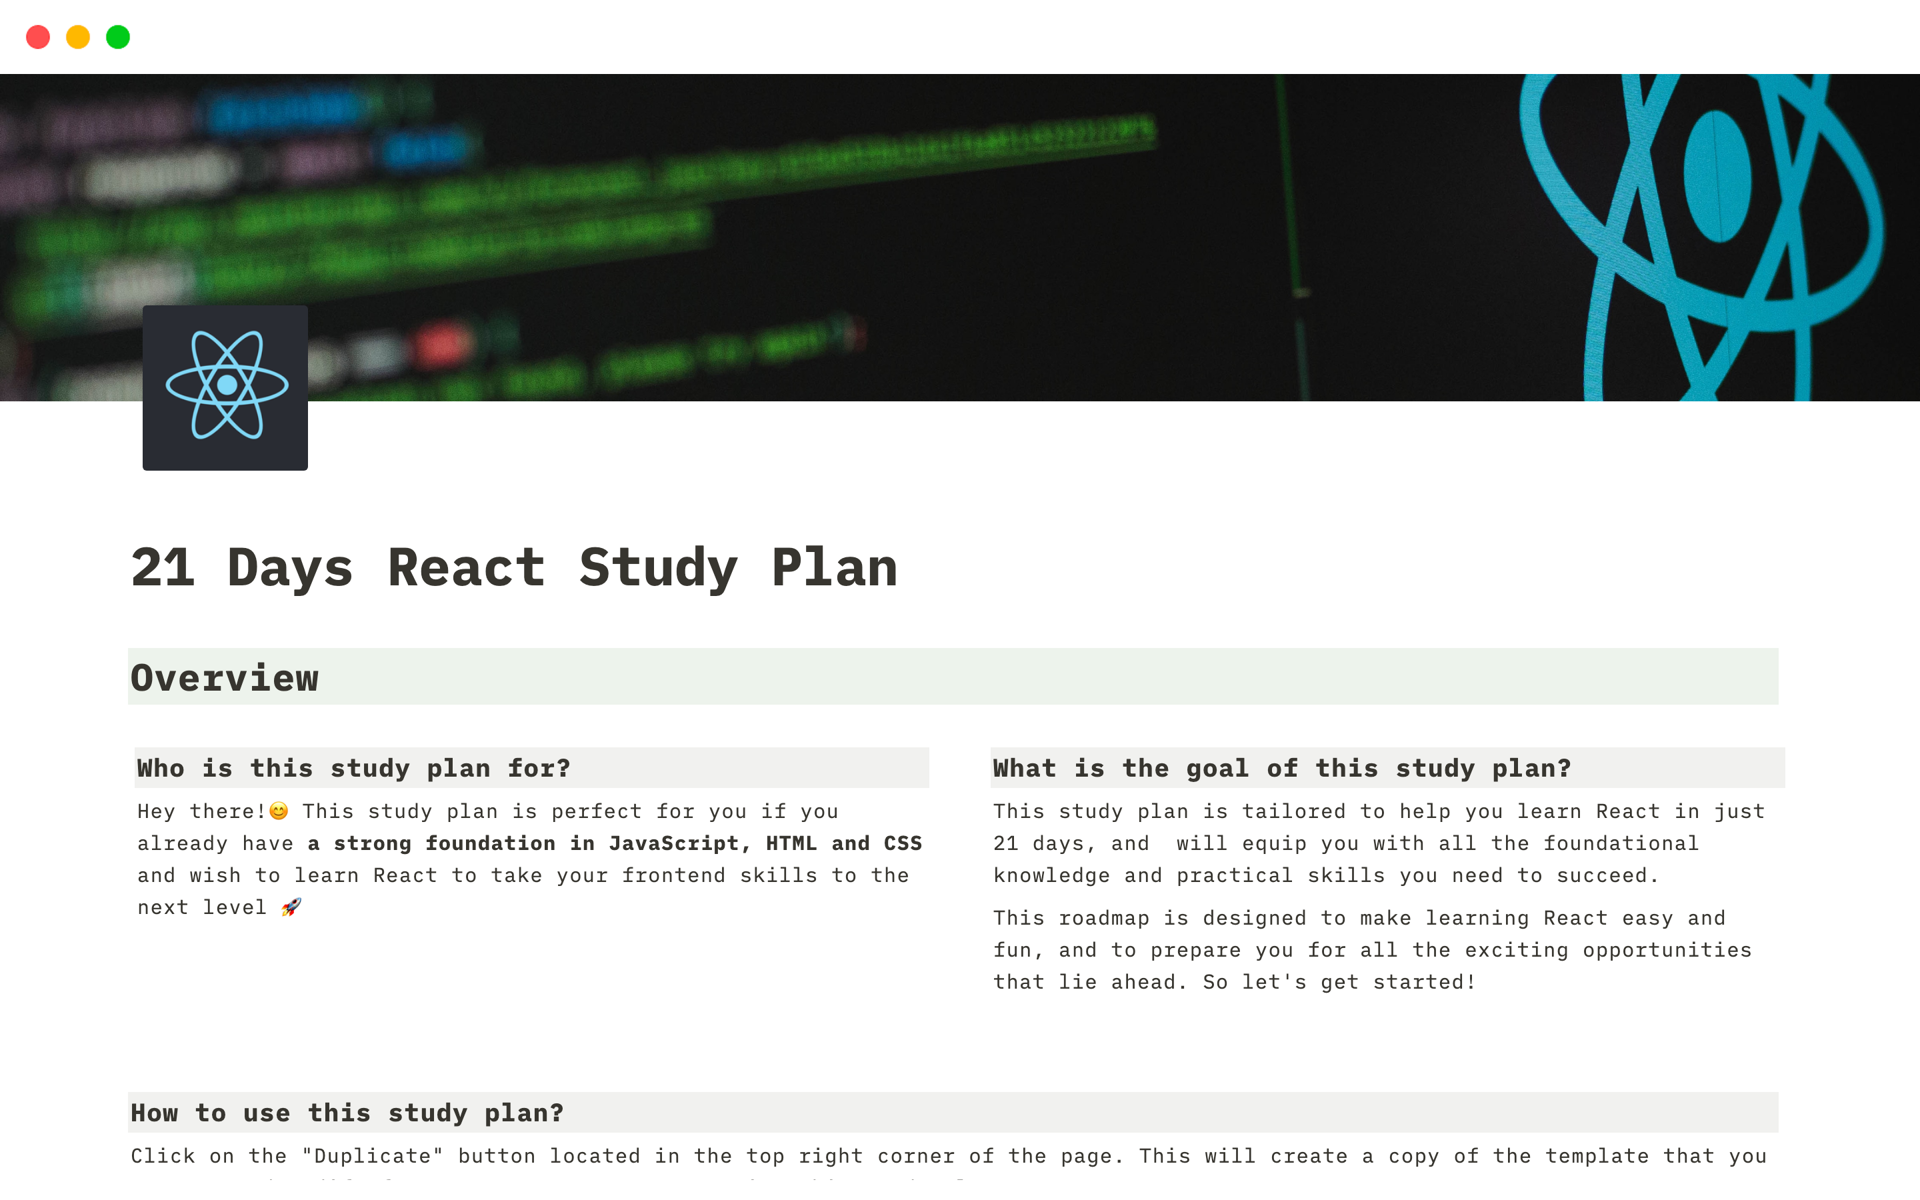 This study plan is perfect for you if you already have a strong foundation in JavaScript, HTML and CSS and wish to learn React to take your frontend skills to the next level.